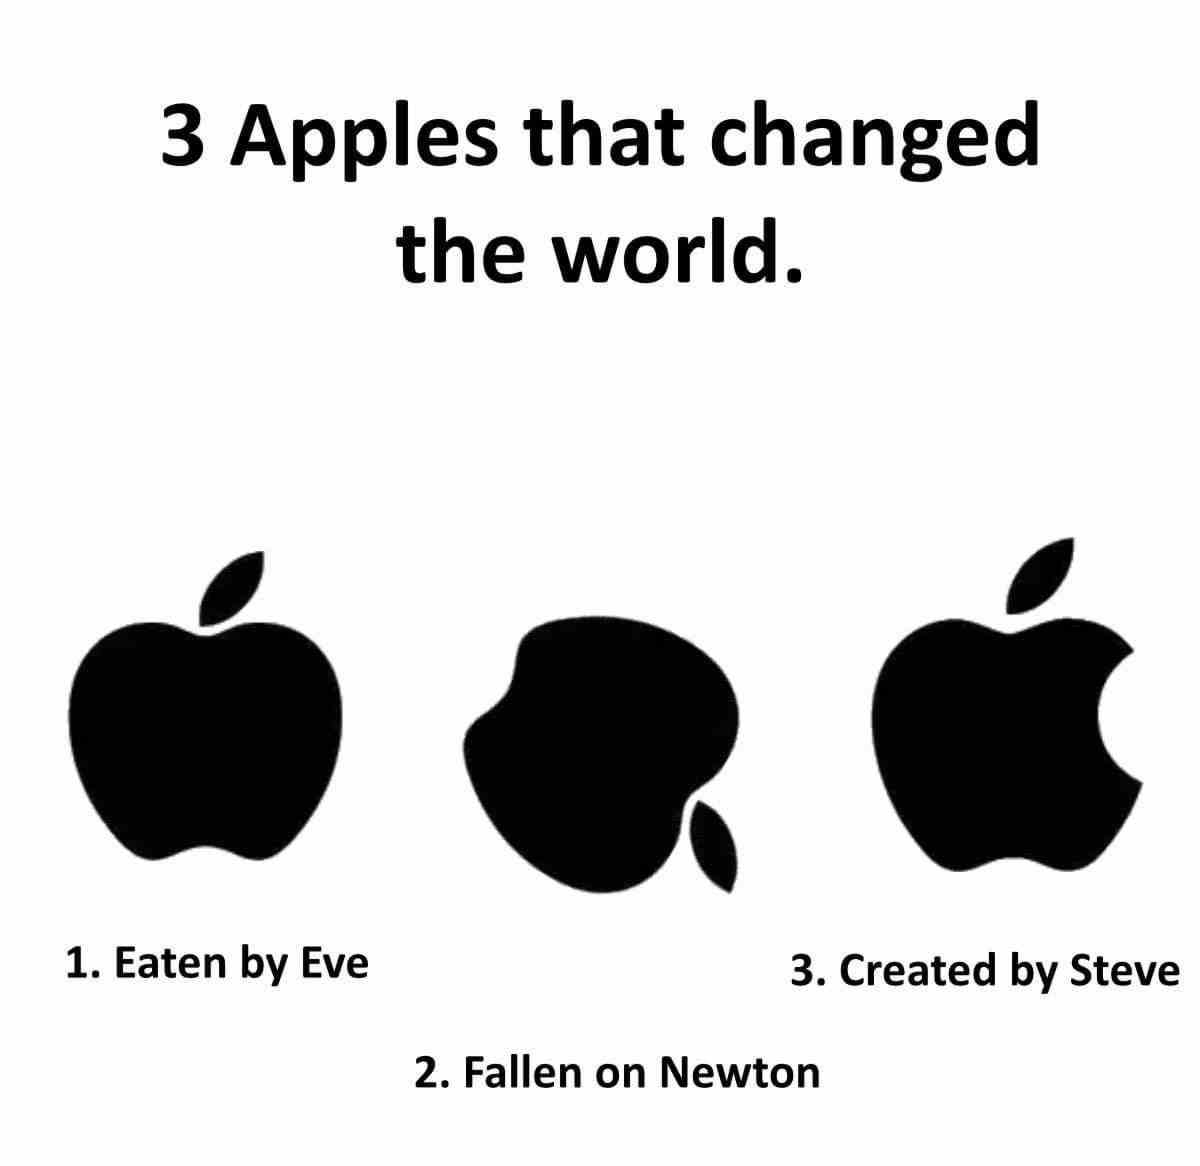 3 Apples that changed the world